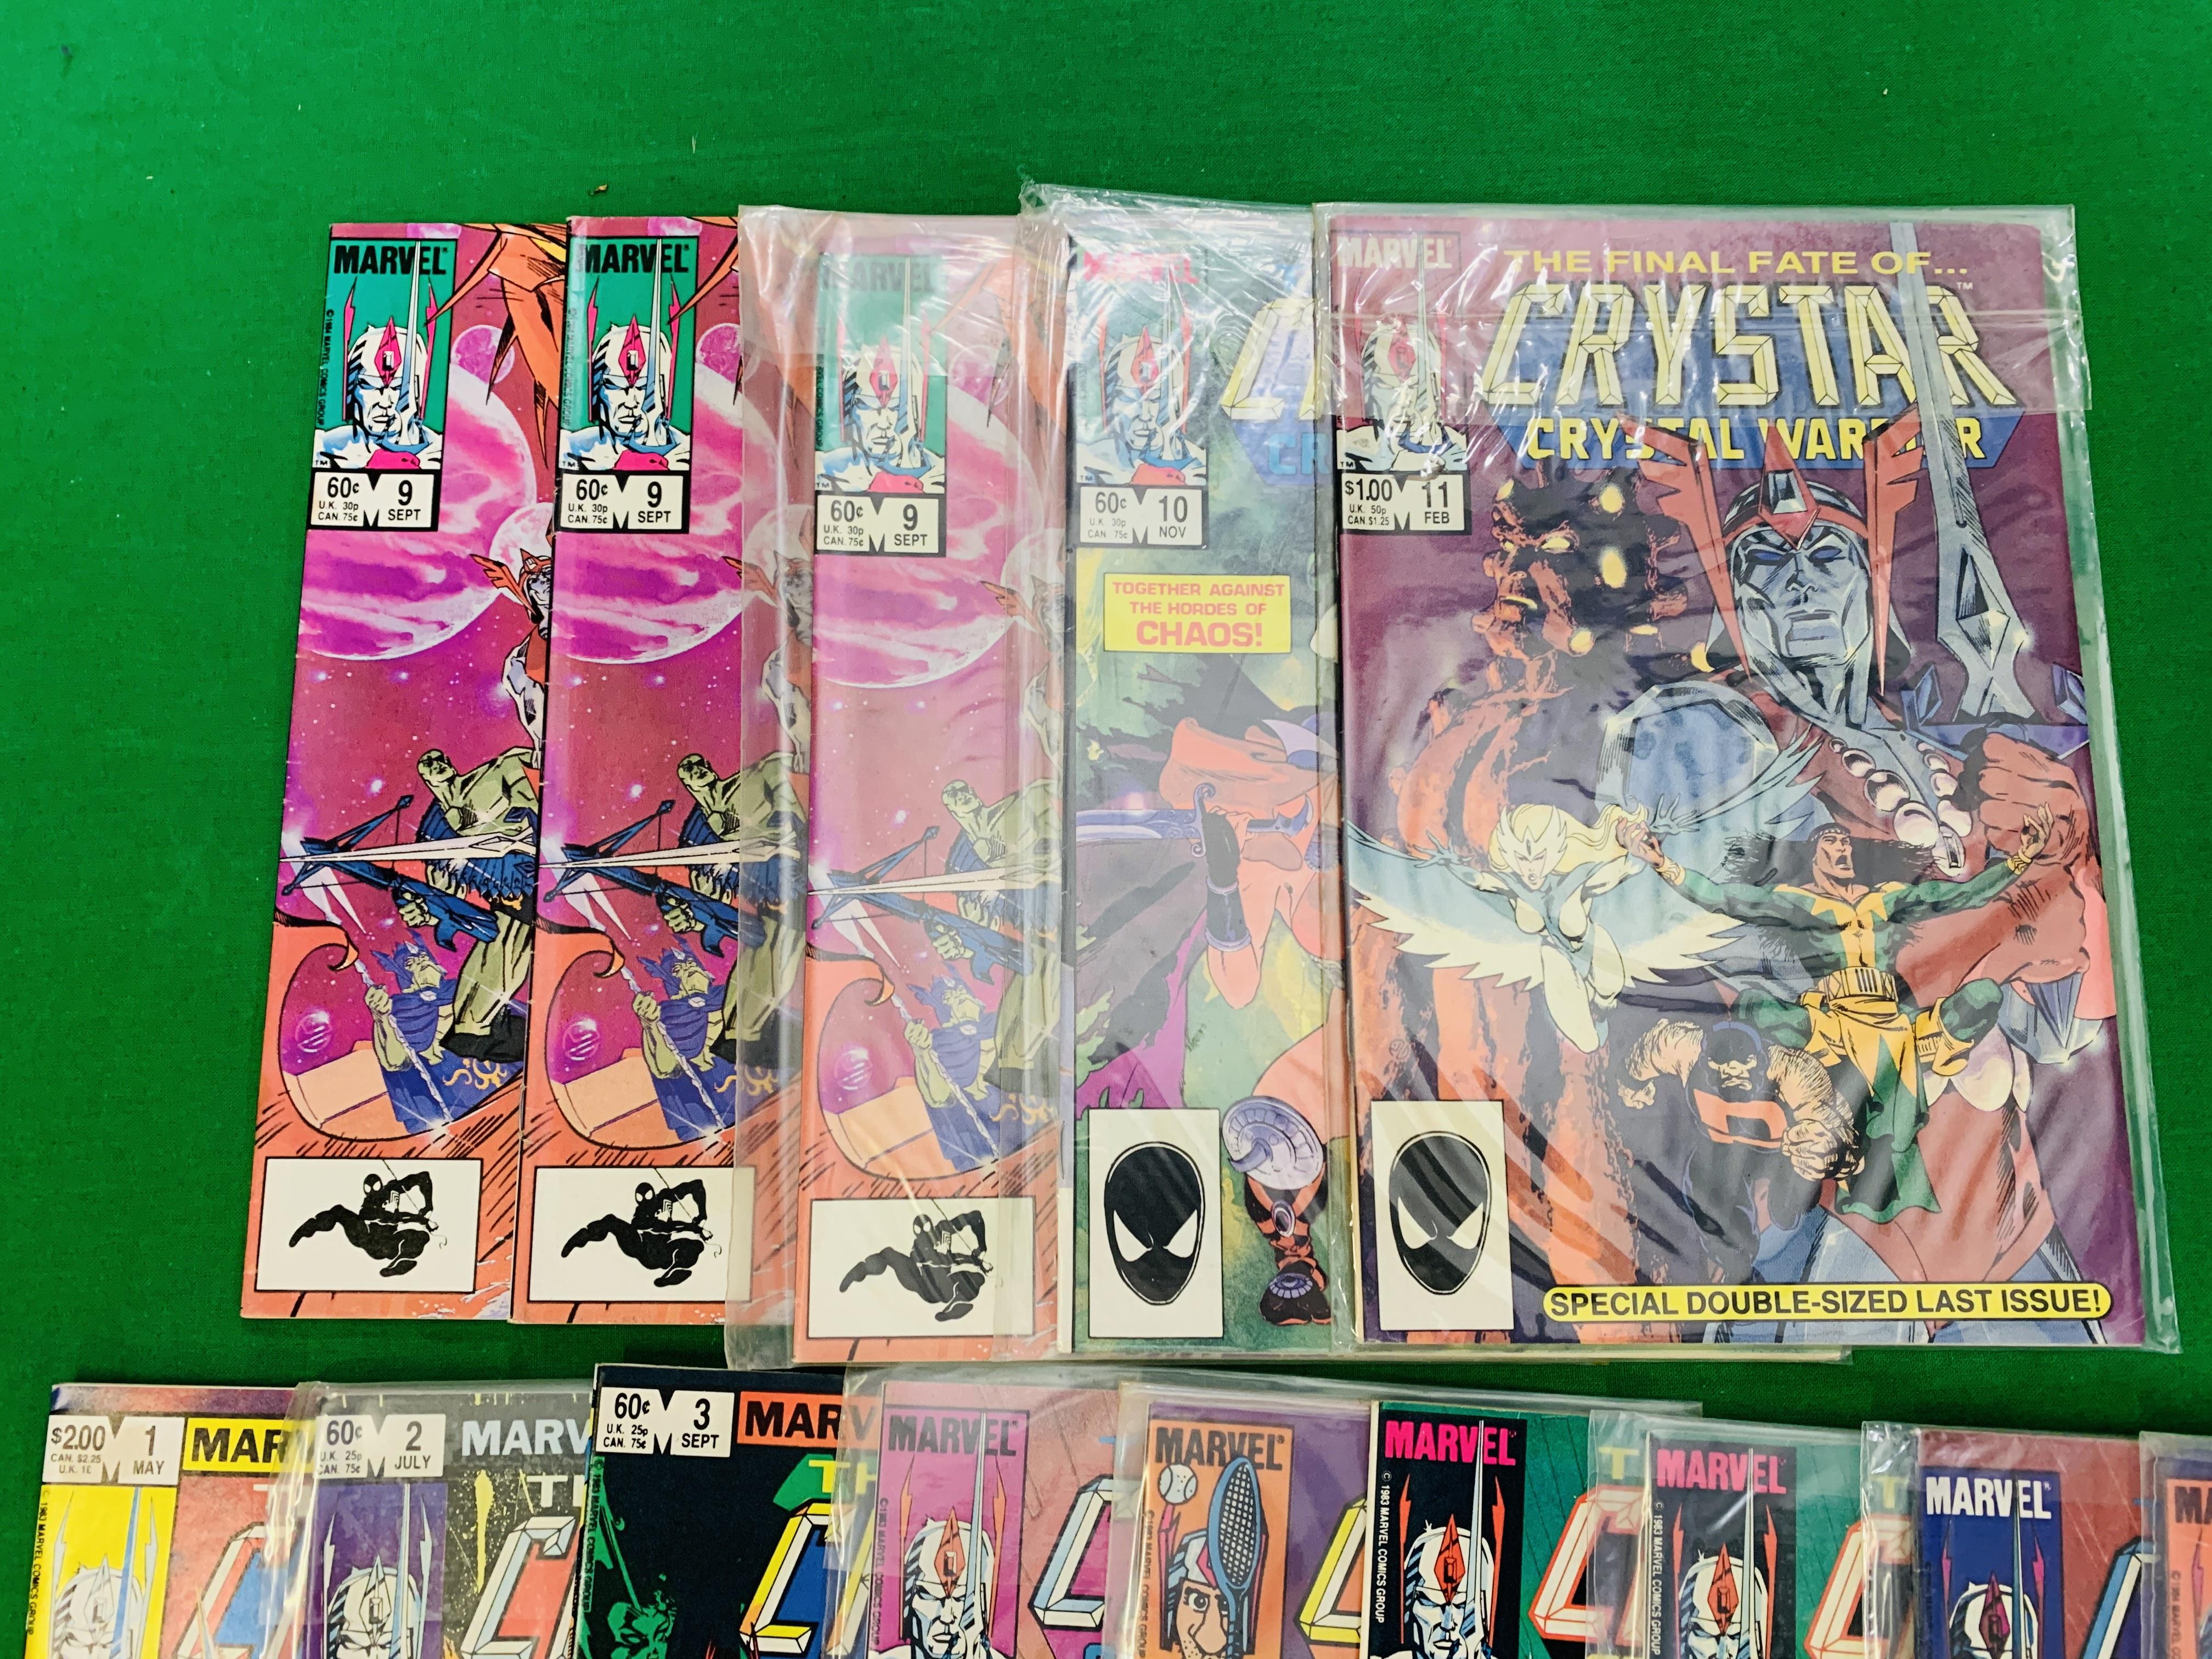 MARVEL COMICS CRYSTAR CRYSTAL WARRIOR NO. 1 - 11 FROM 1983, COUPLE OF DUPLICATES, INCLUDES NO. 8. - Image 4 of 4